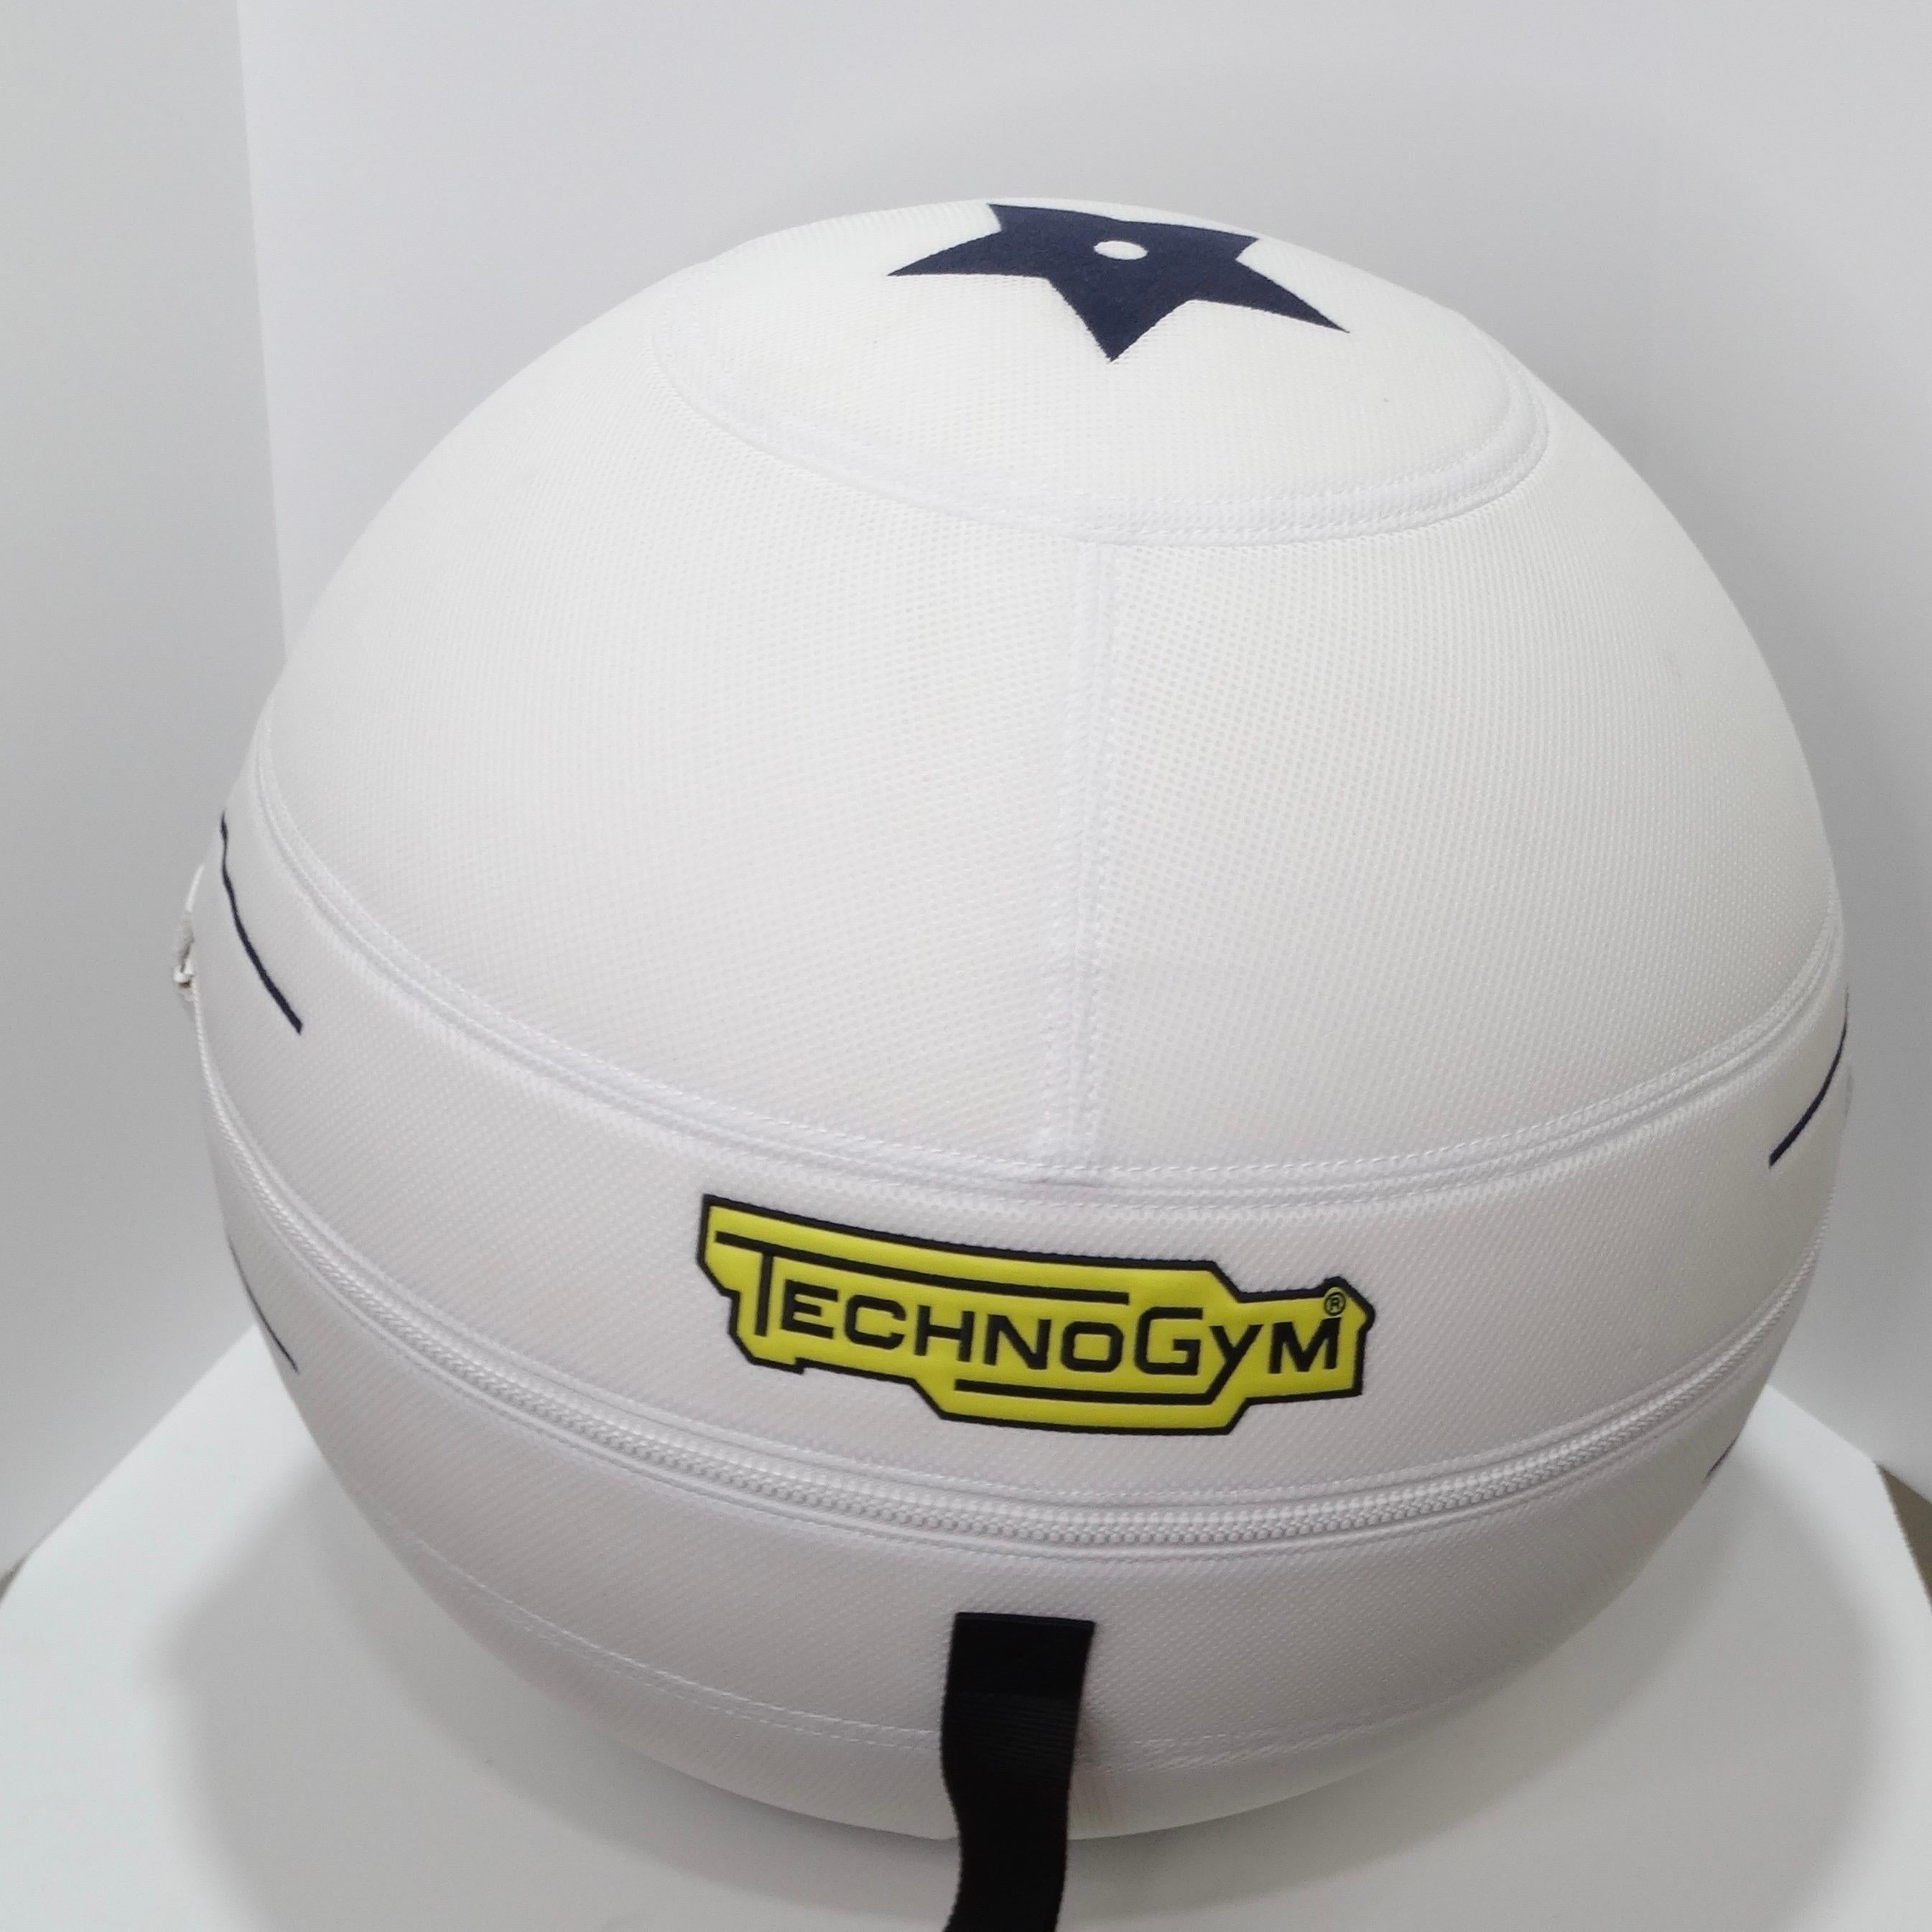 Christian Dior Limited Edition Medicine Ball In Good Condition For Sale In Scottsdale, AZ